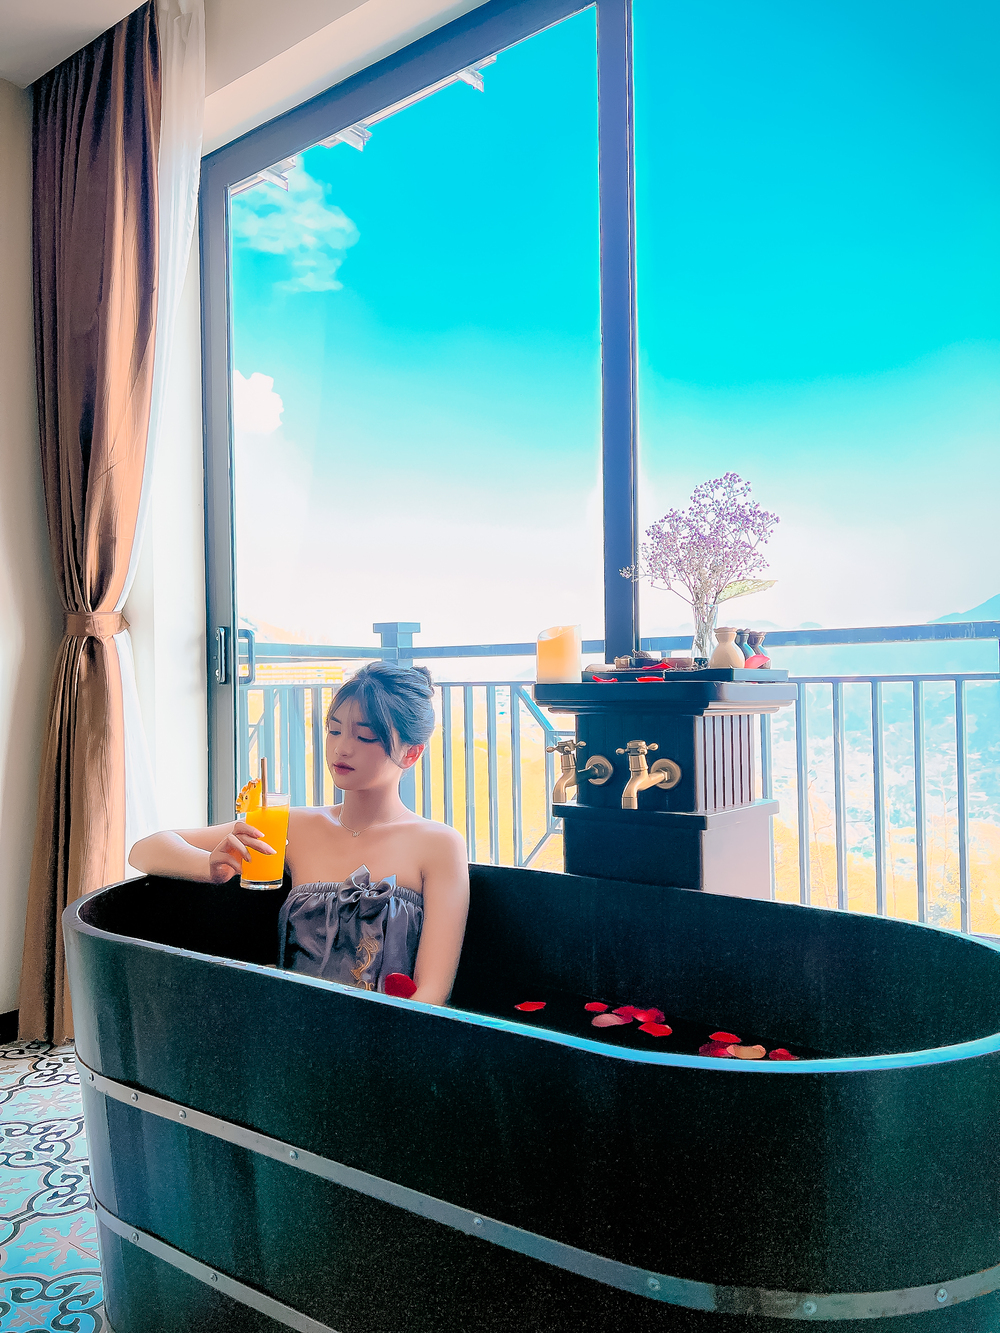 Discover the wonderful uses of Red Dao bath water